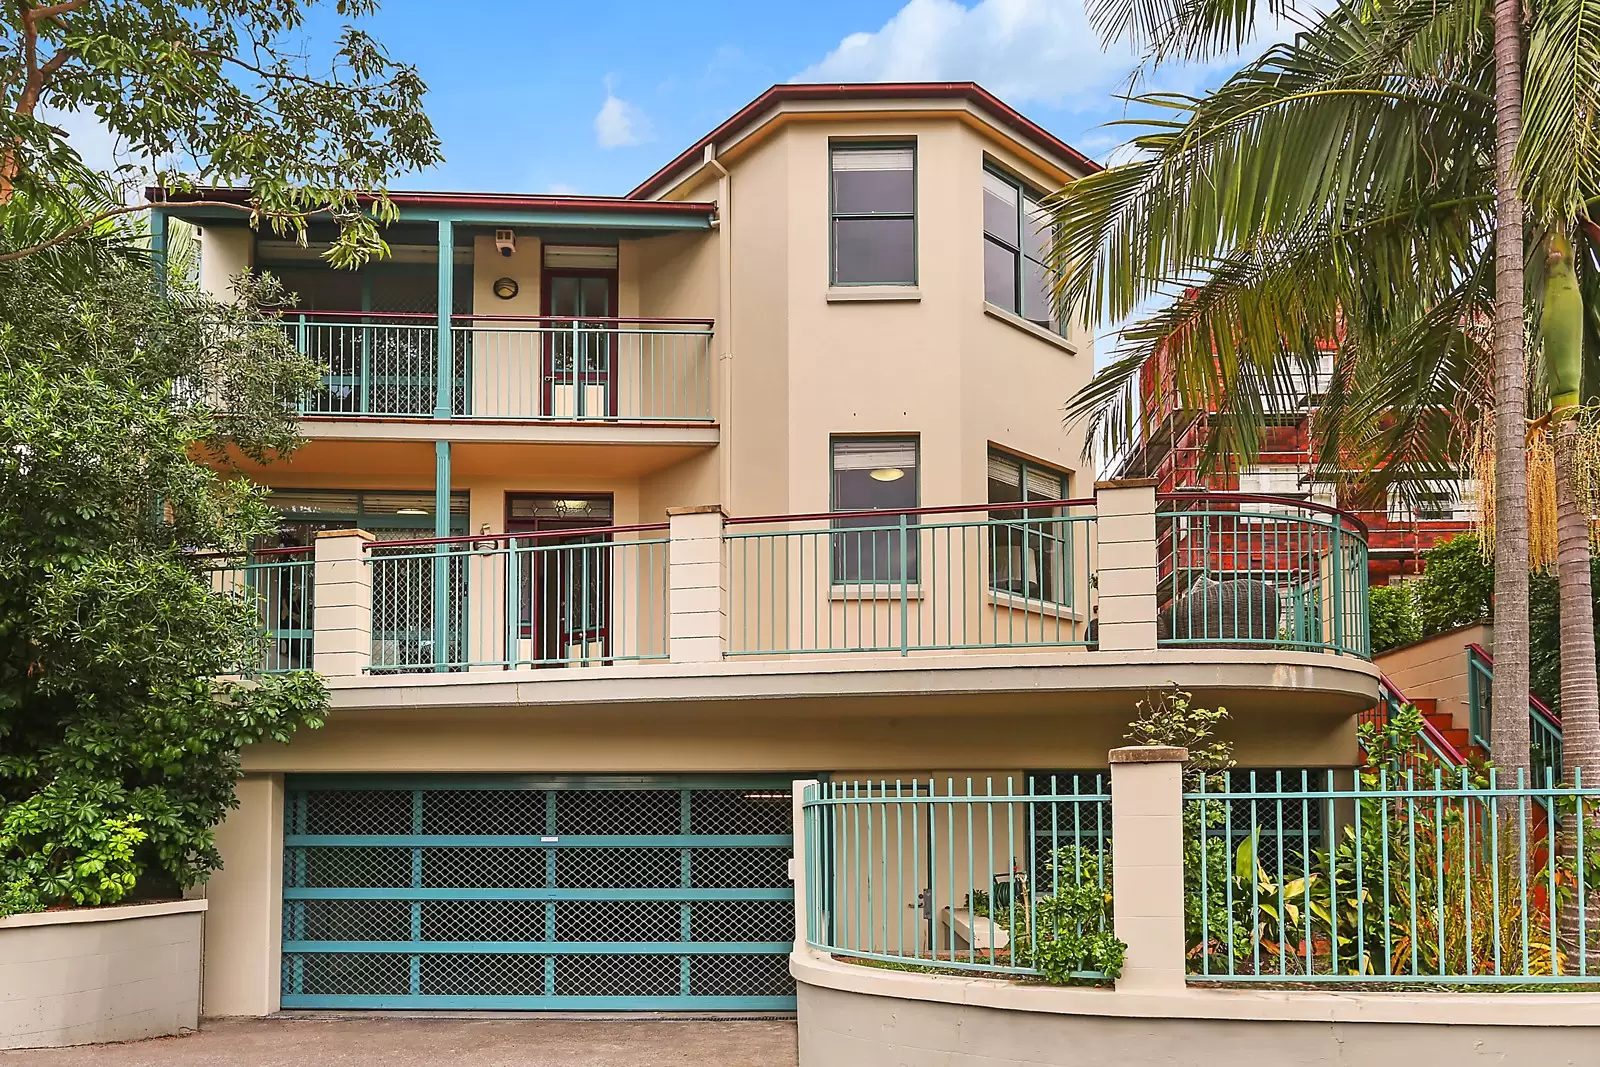 Photo #7: 4/80 Icasia Lane (enter Via Magney Lane), Woollahra - Sold by Sydney Sotheby's International Realty